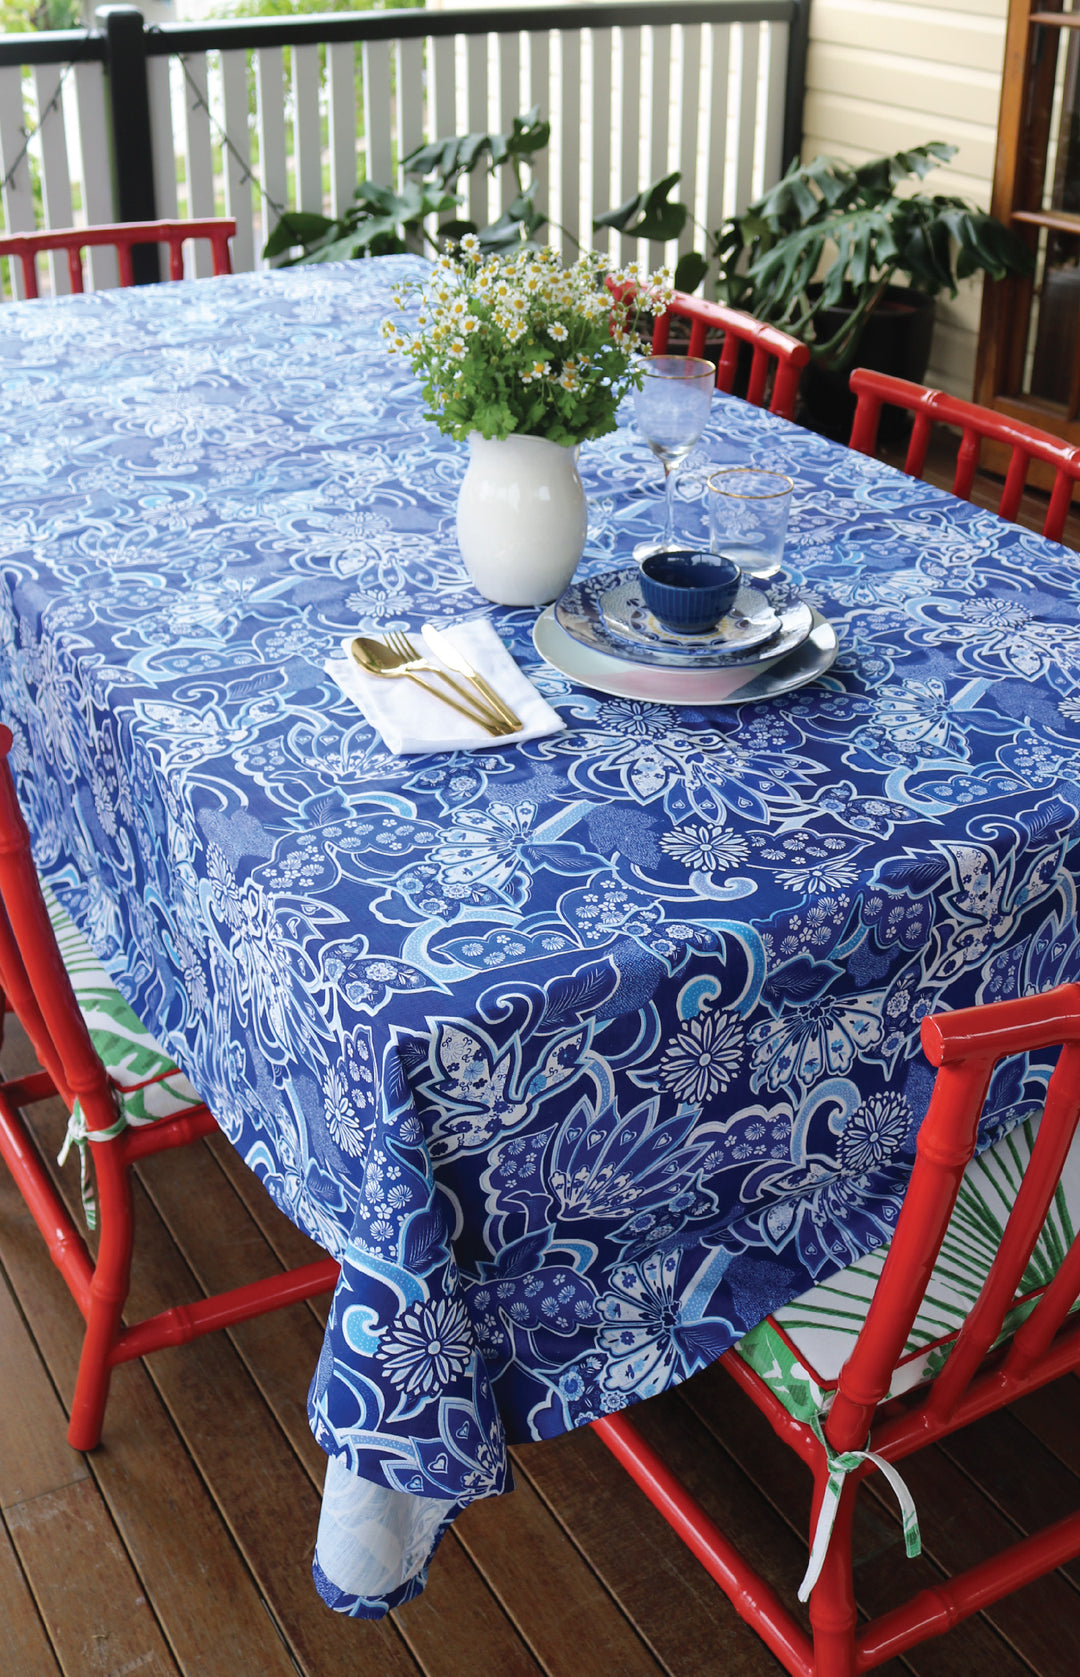 Tablecloth Large in she's the one blue